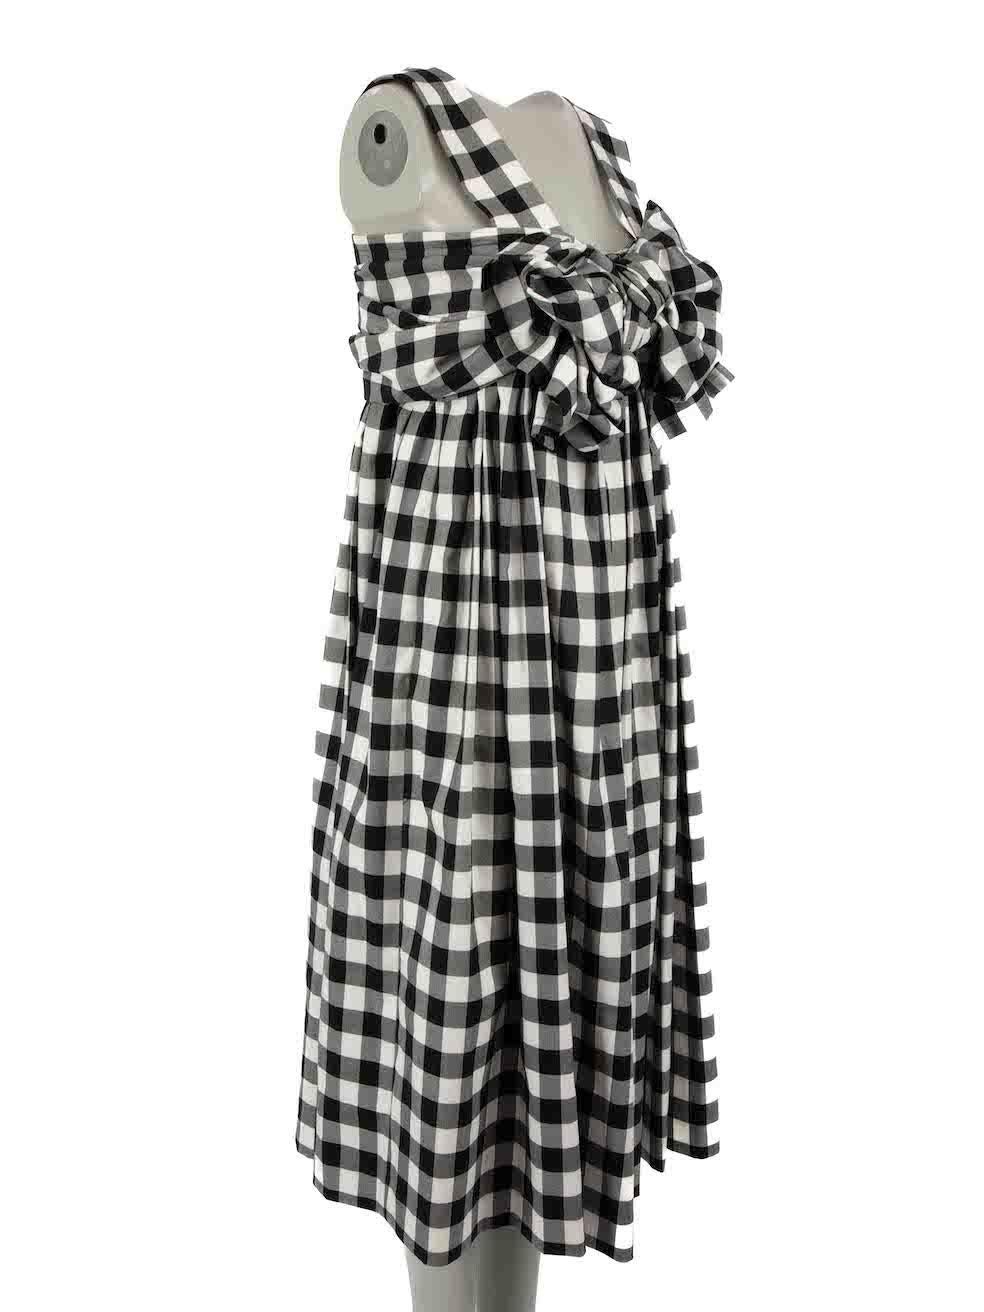 CONDITION is Never worn, with tags. No visible wear to dress is evident on this new Comme Des Garcons designer resale item.
 
Details
Black
Polyester
Dress
Gingham pattern
Sleeveless
Square neck
Bow detail
Midi
Back zip and hook fastening
2x Side